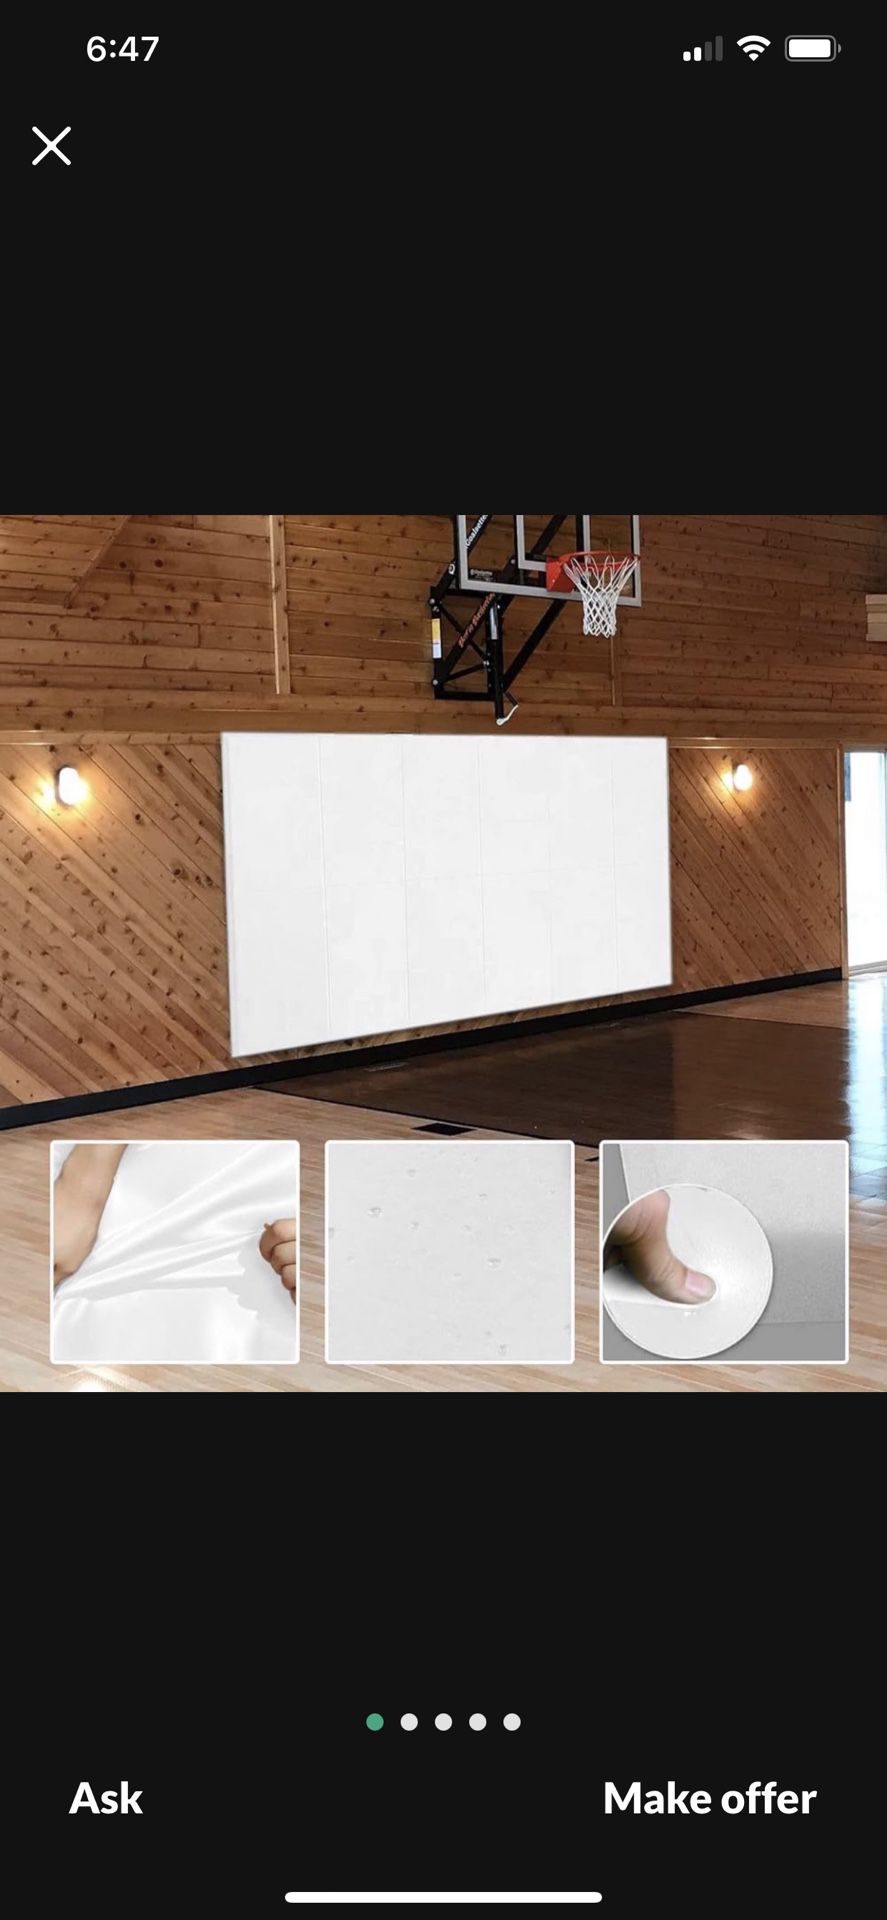 PROGOAL 2"/4" Thick Foam Protection Wall Pad, Gym Basketball-Court Protectors, Durable Waterproof Padding for Wall-Mounted Basketball Hoops(72" L× 16"